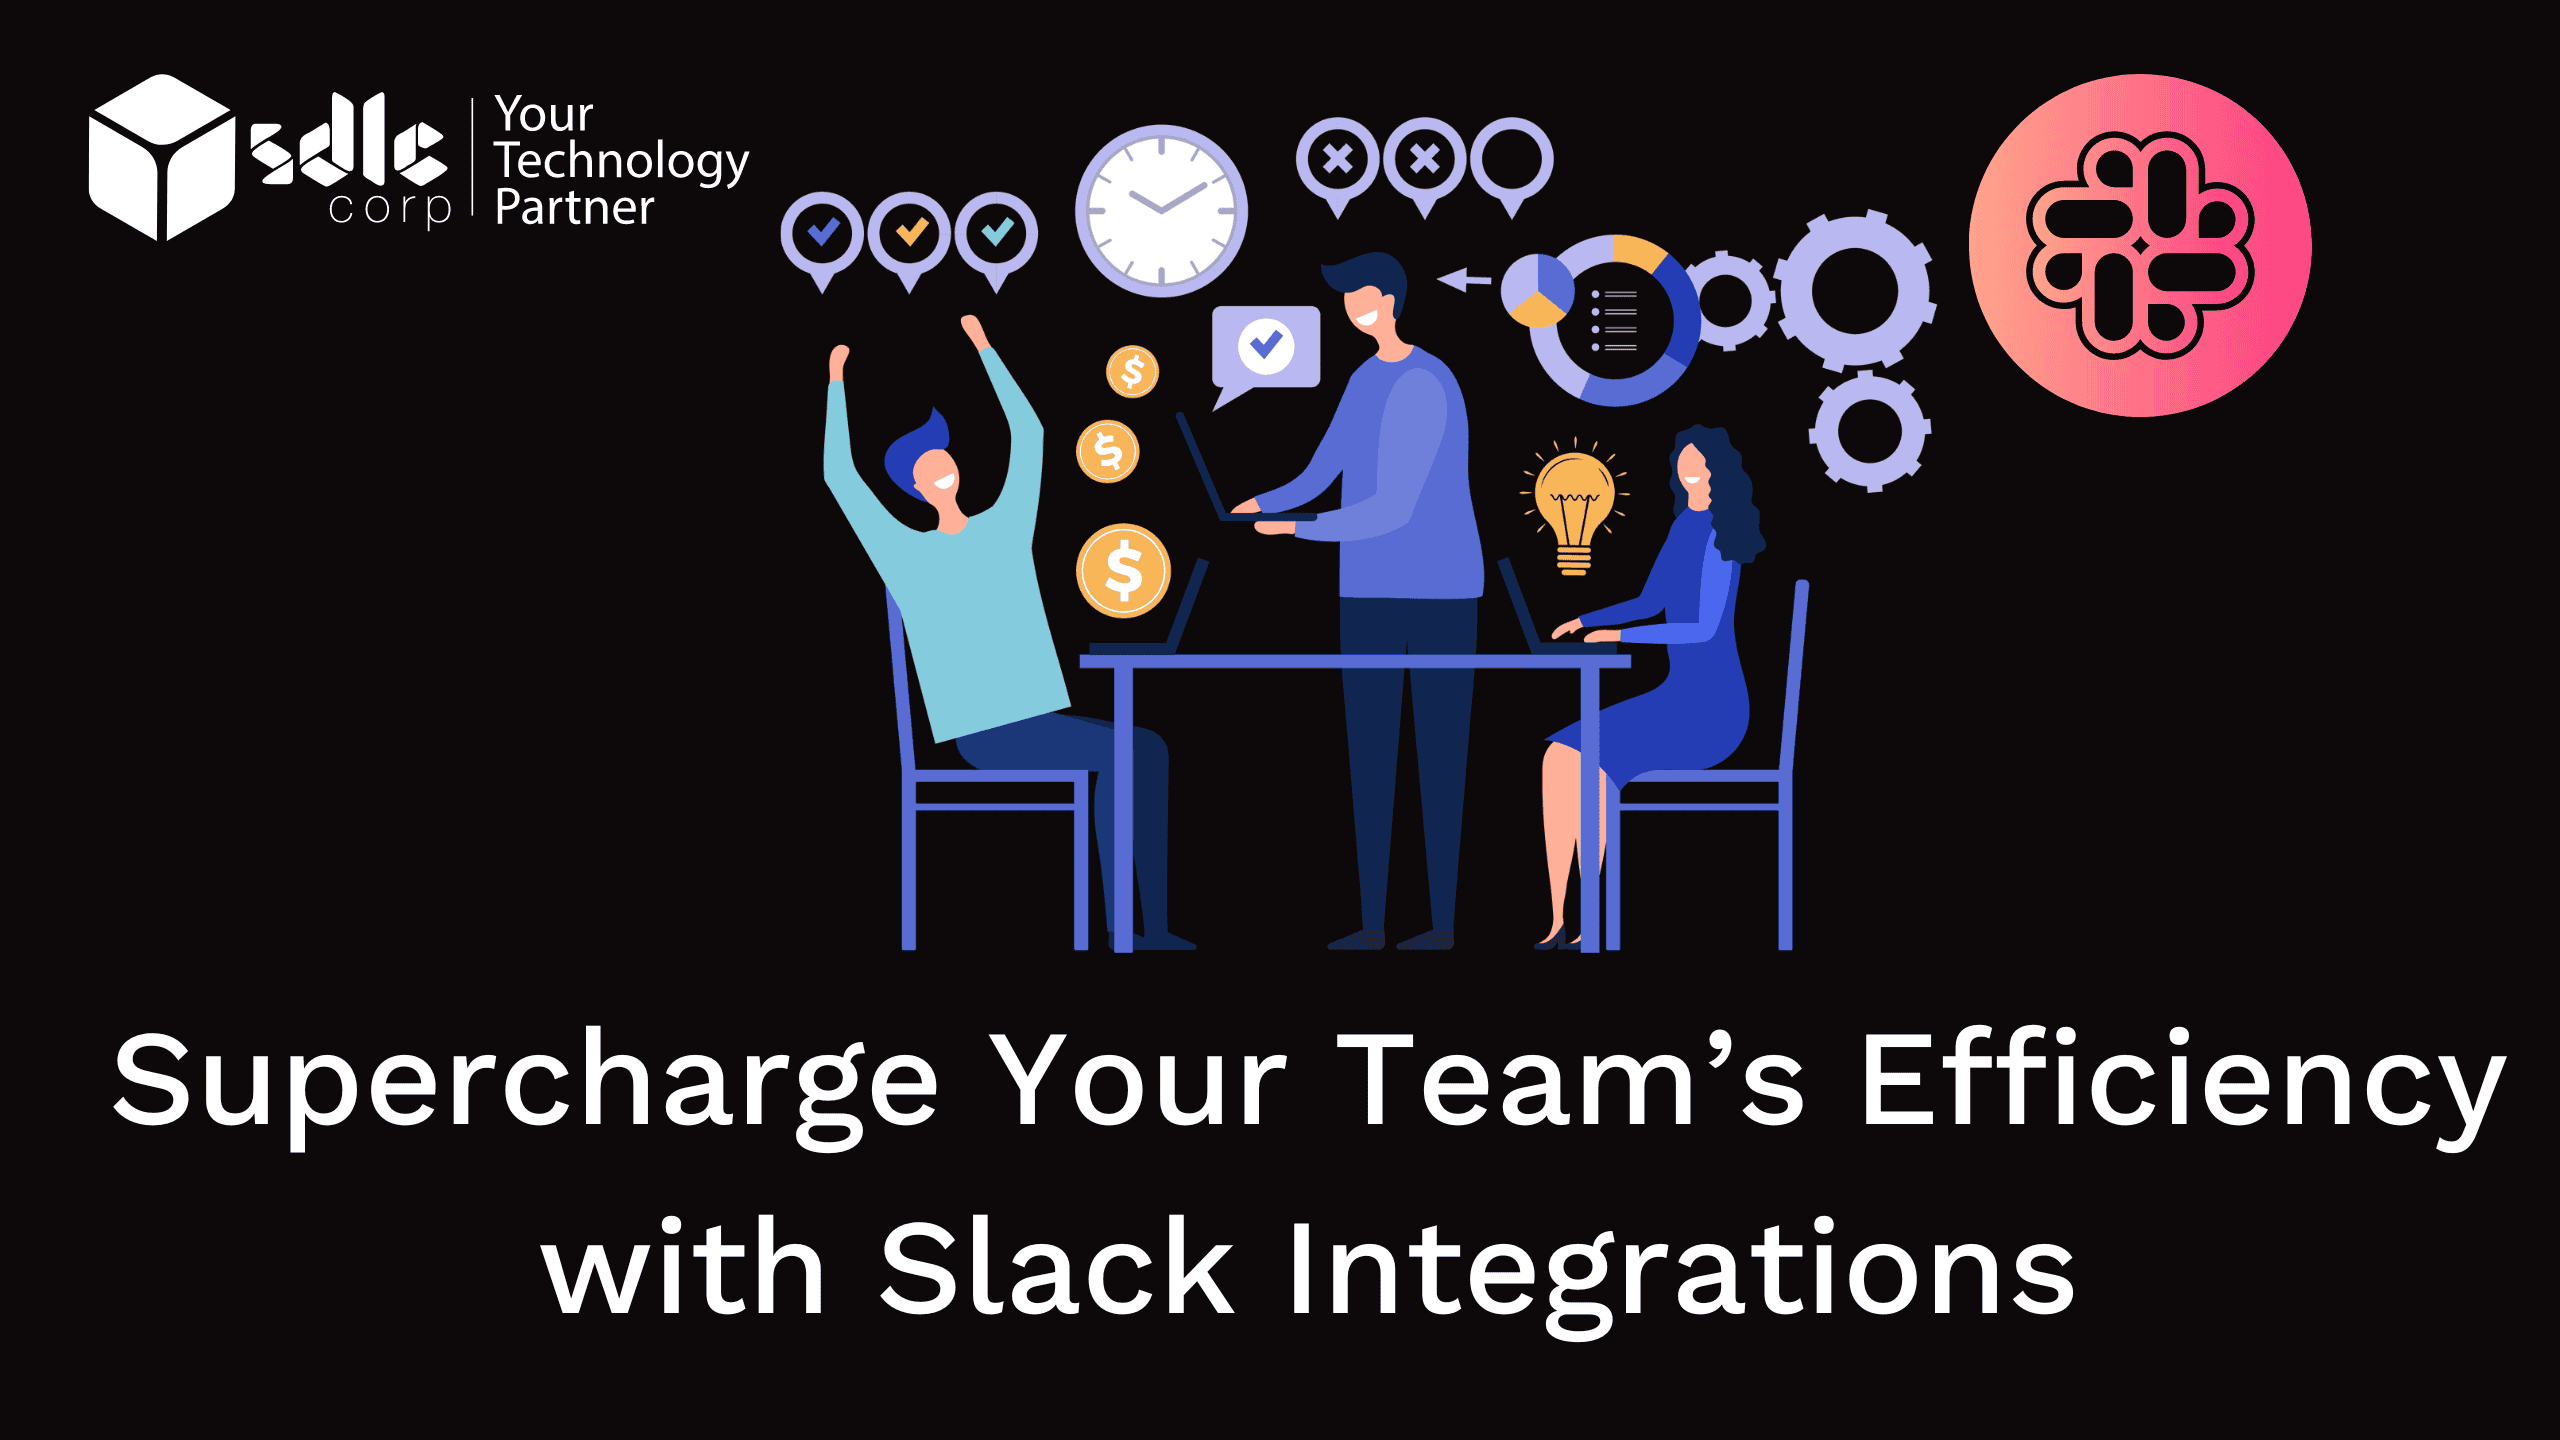 Supercharge Your Team’s Efficiency with Slack Integrations